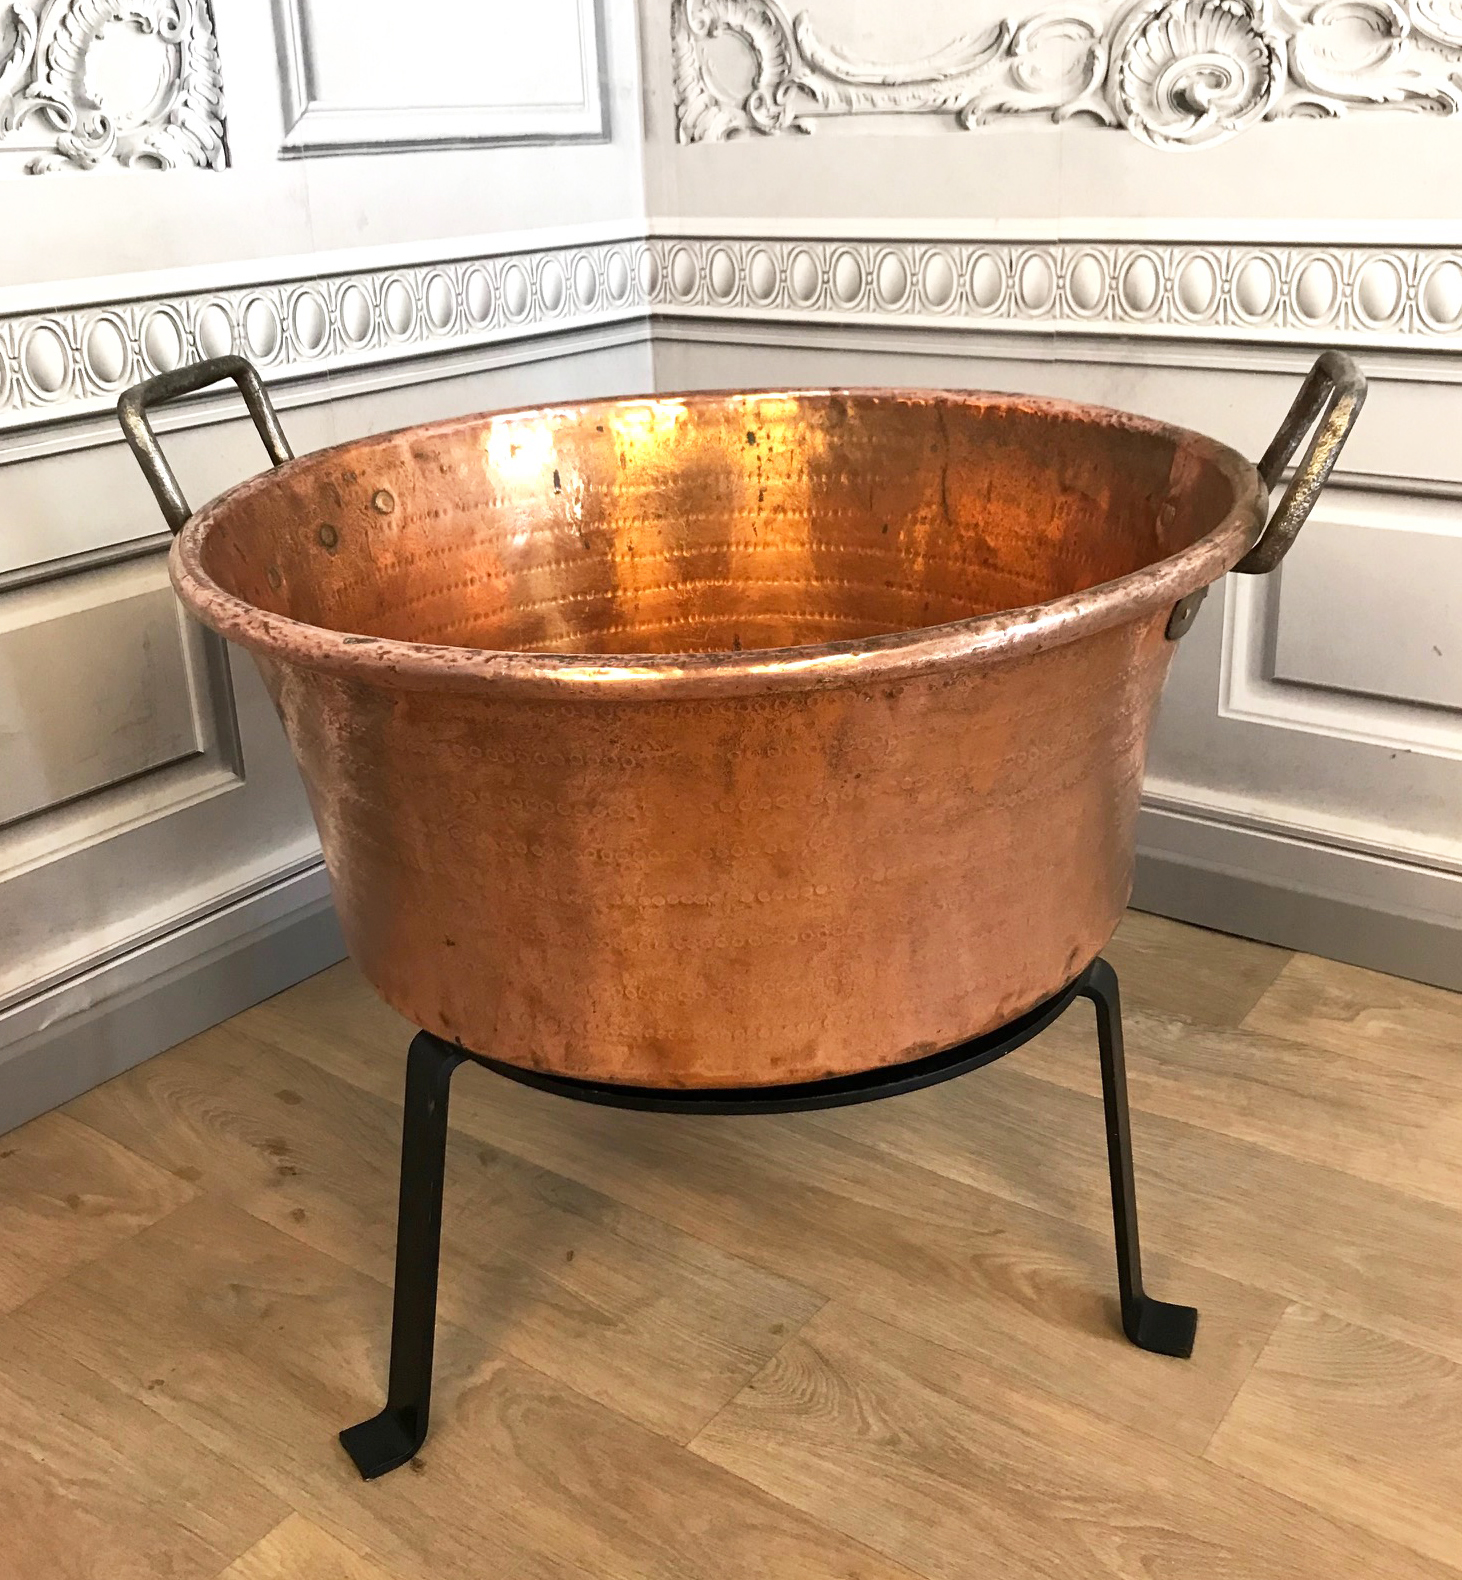 LARGE COPPER DOUBLE HANDLED POT 35f40a